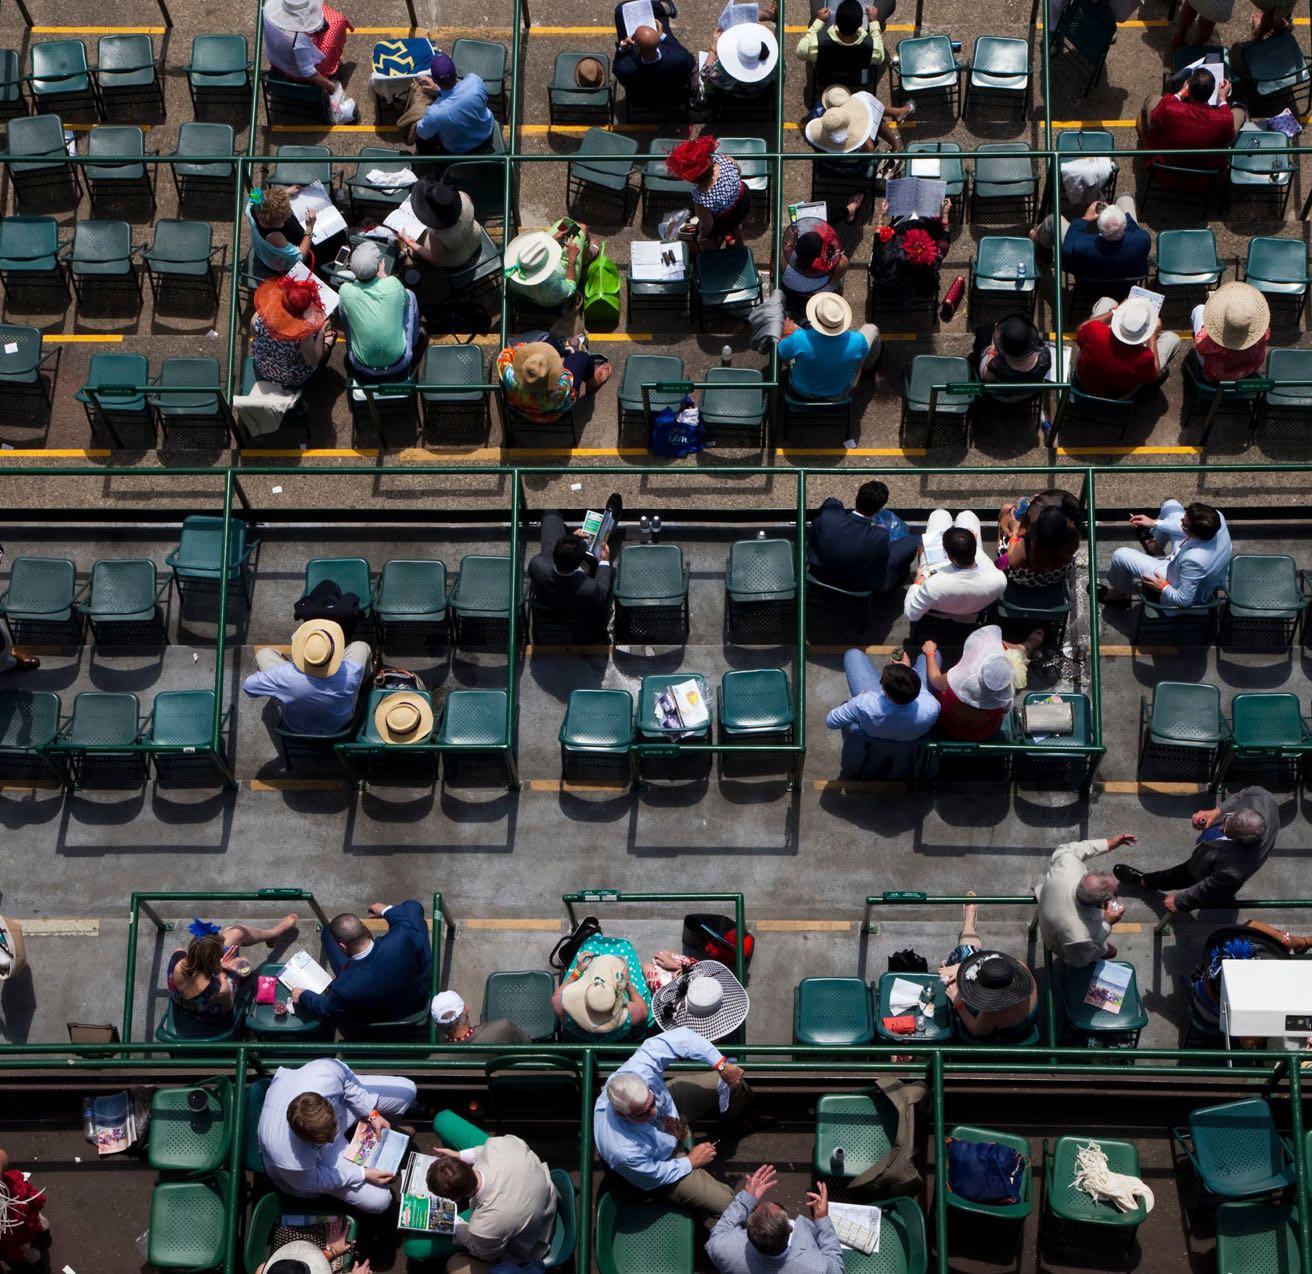 Overhead shot of people sitting in chairs at a derby.